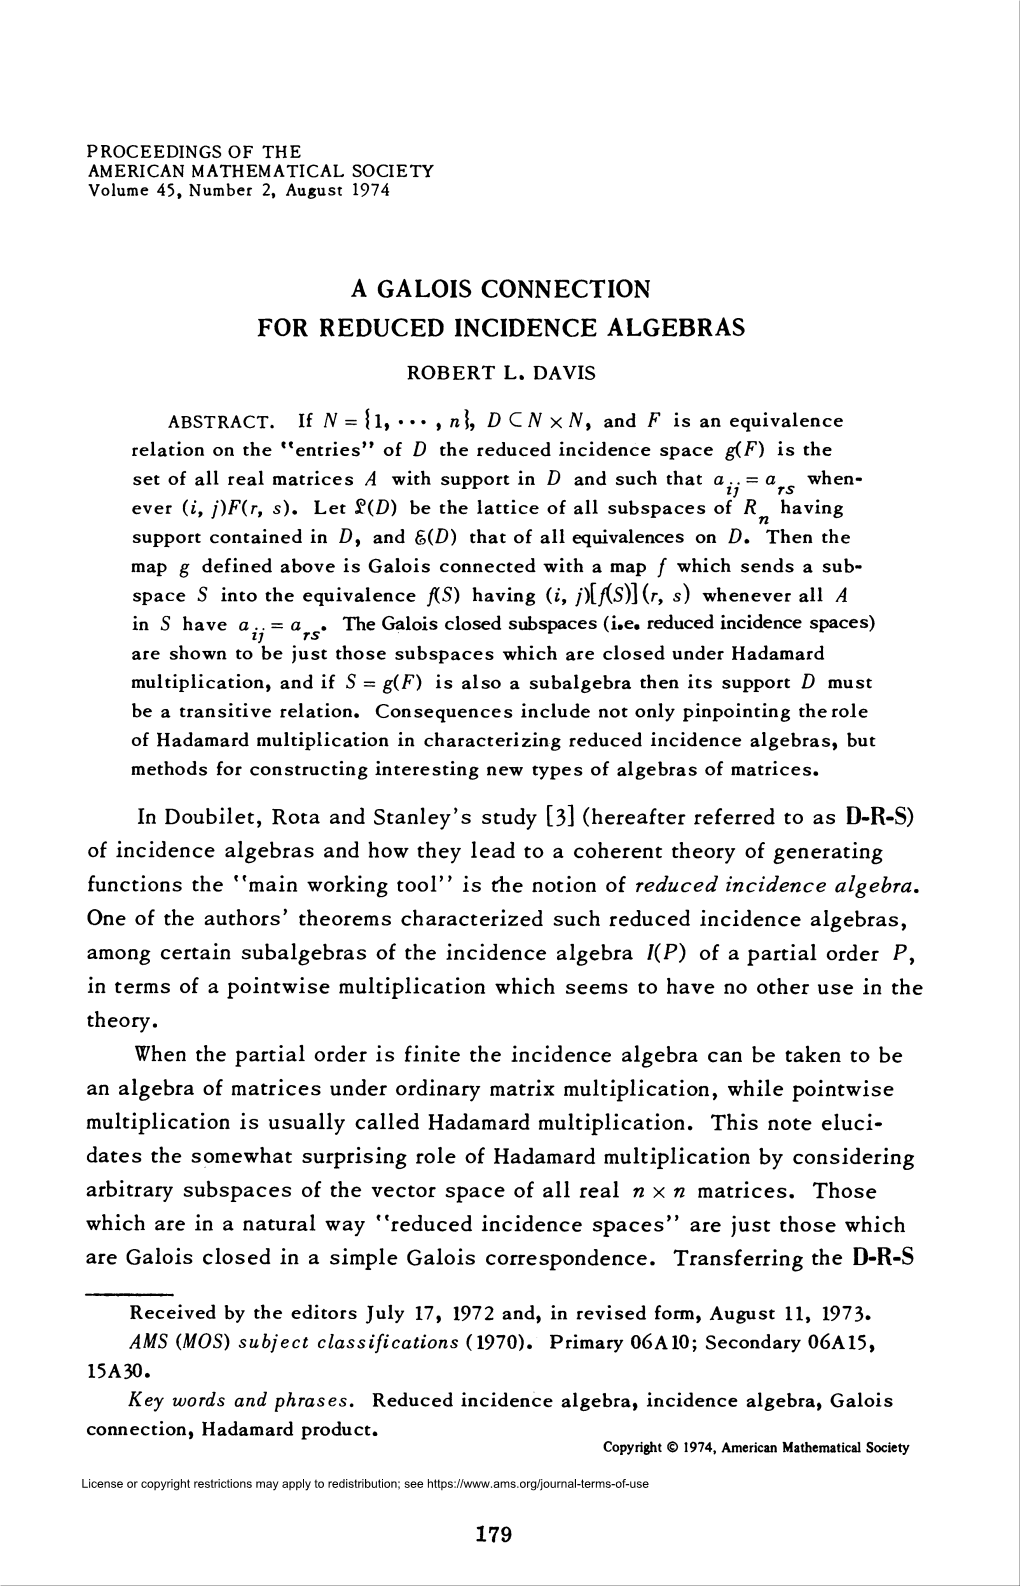 A Galois Connection for Reduced Incidence Algebras